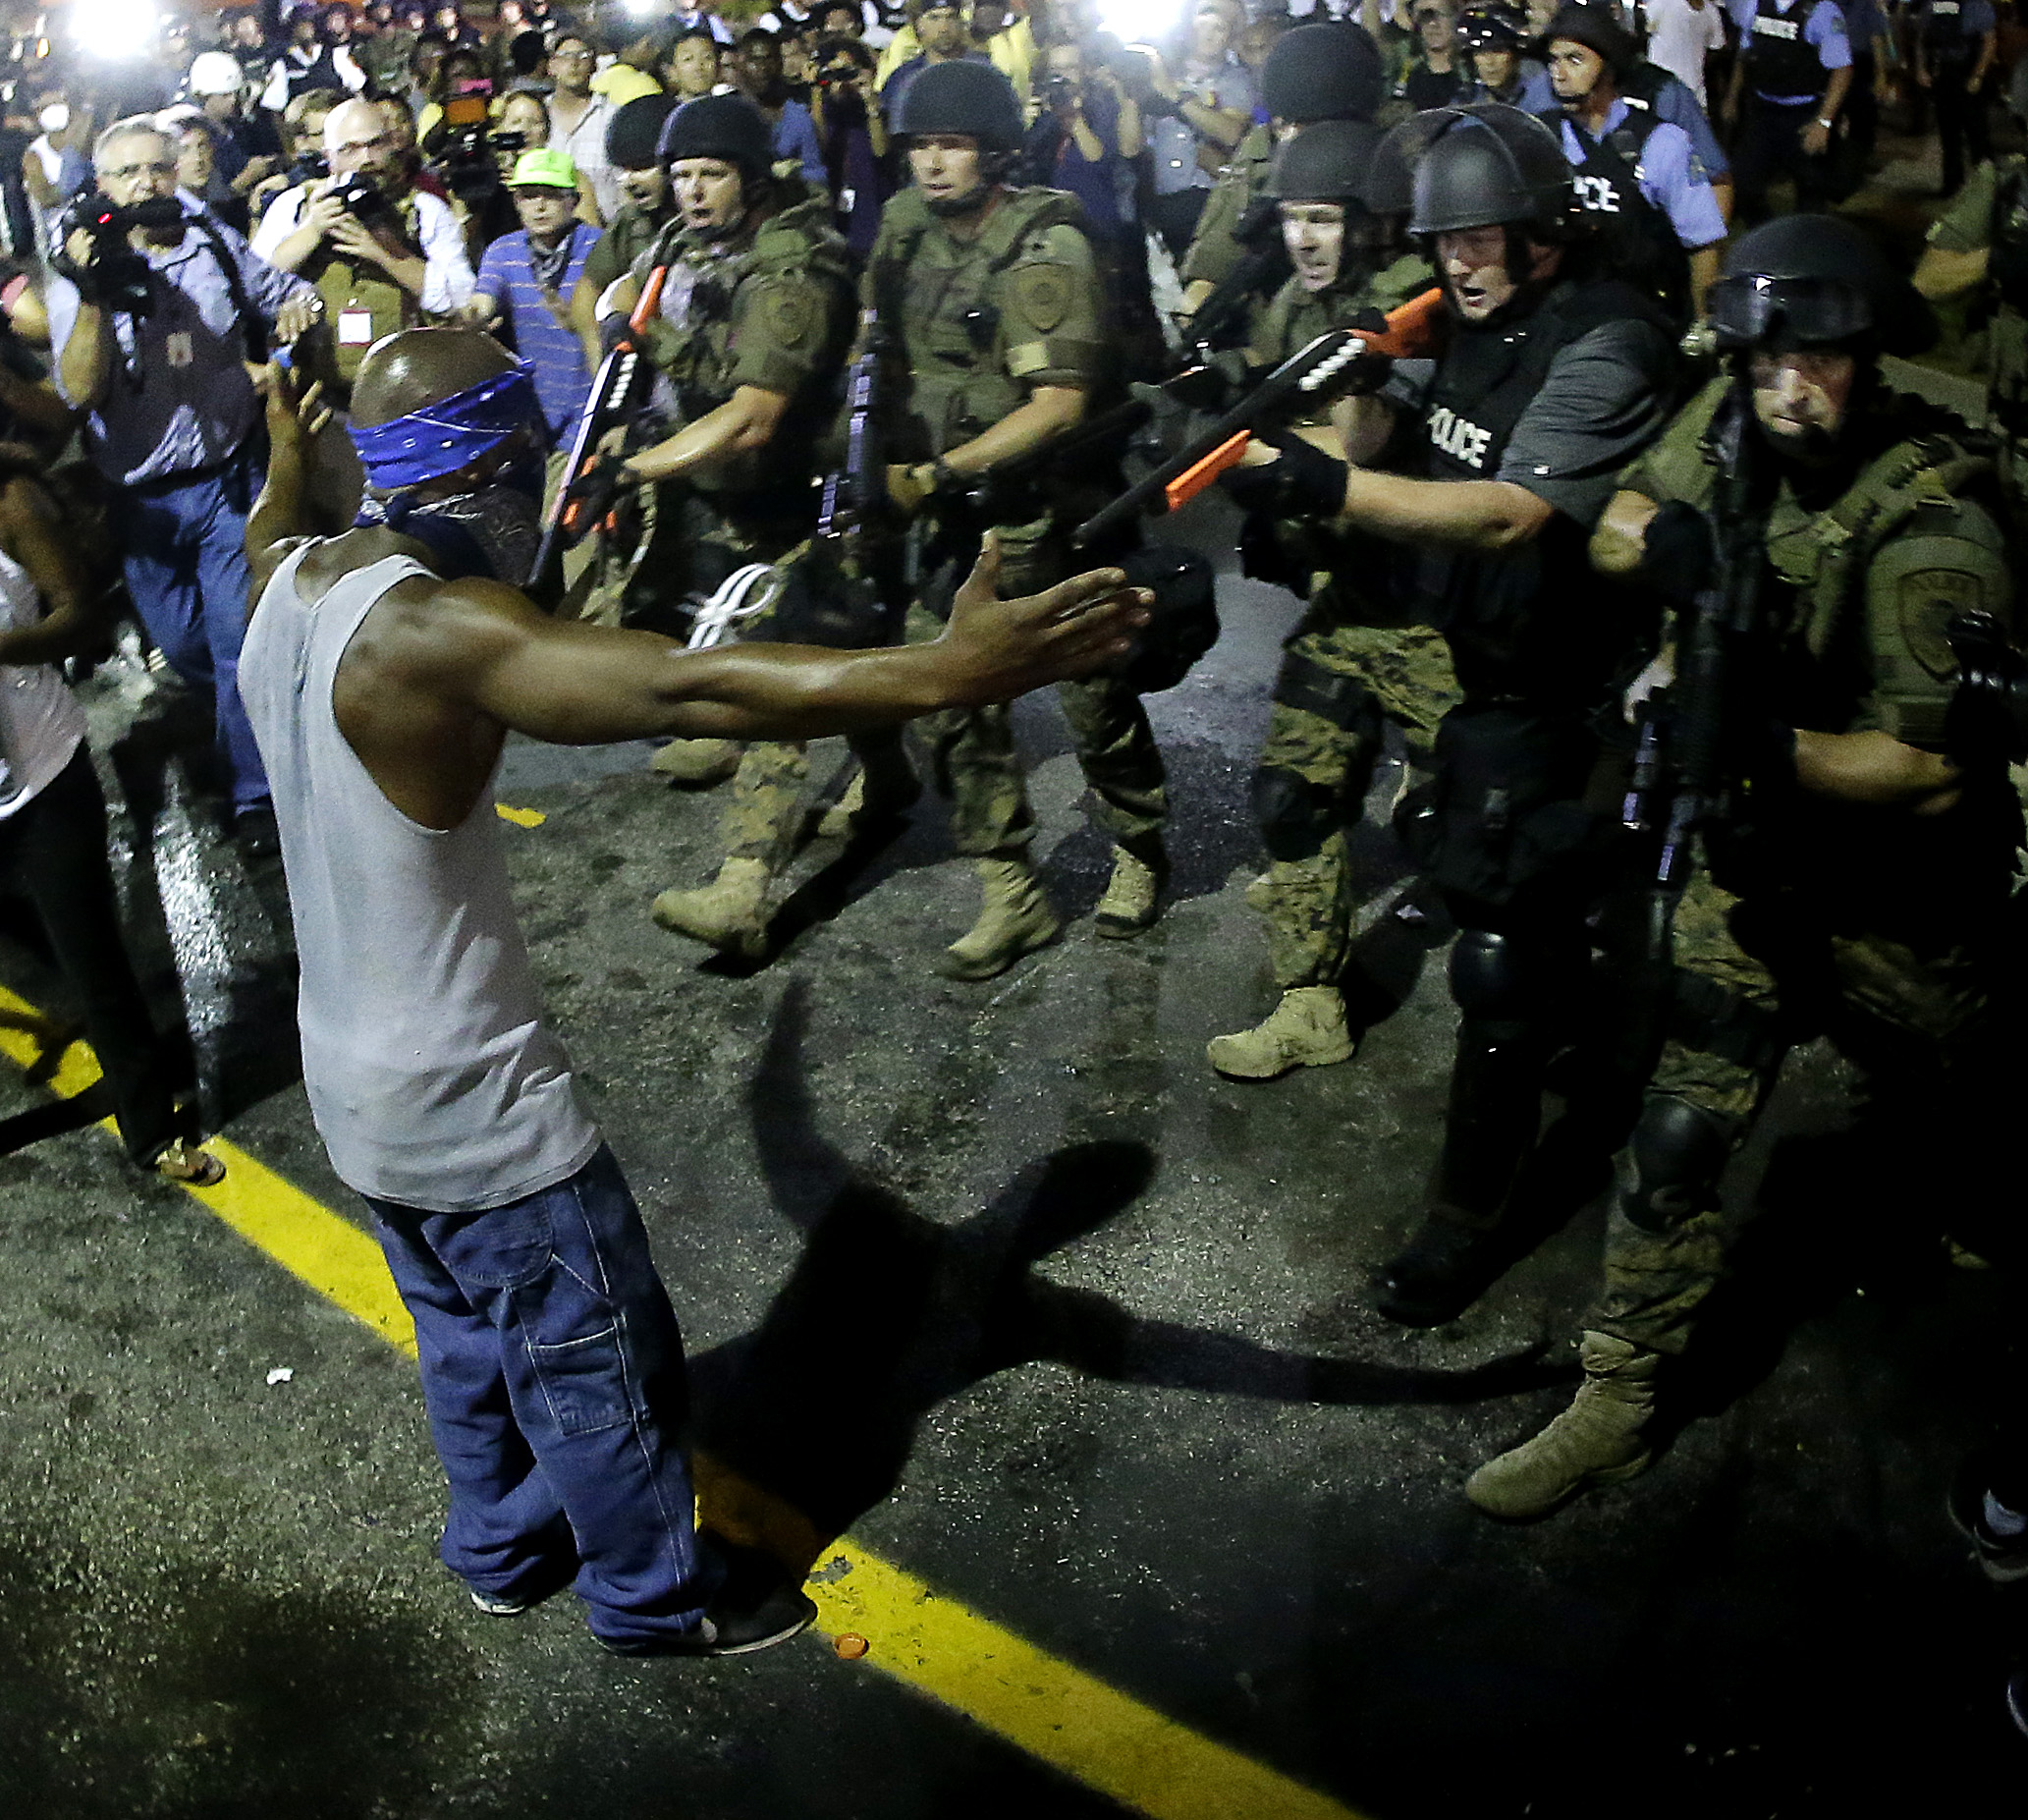 PHOTO: Police arrest a man as they disperse a protest in Ferguson, Mo., Aug. 20, 2014.